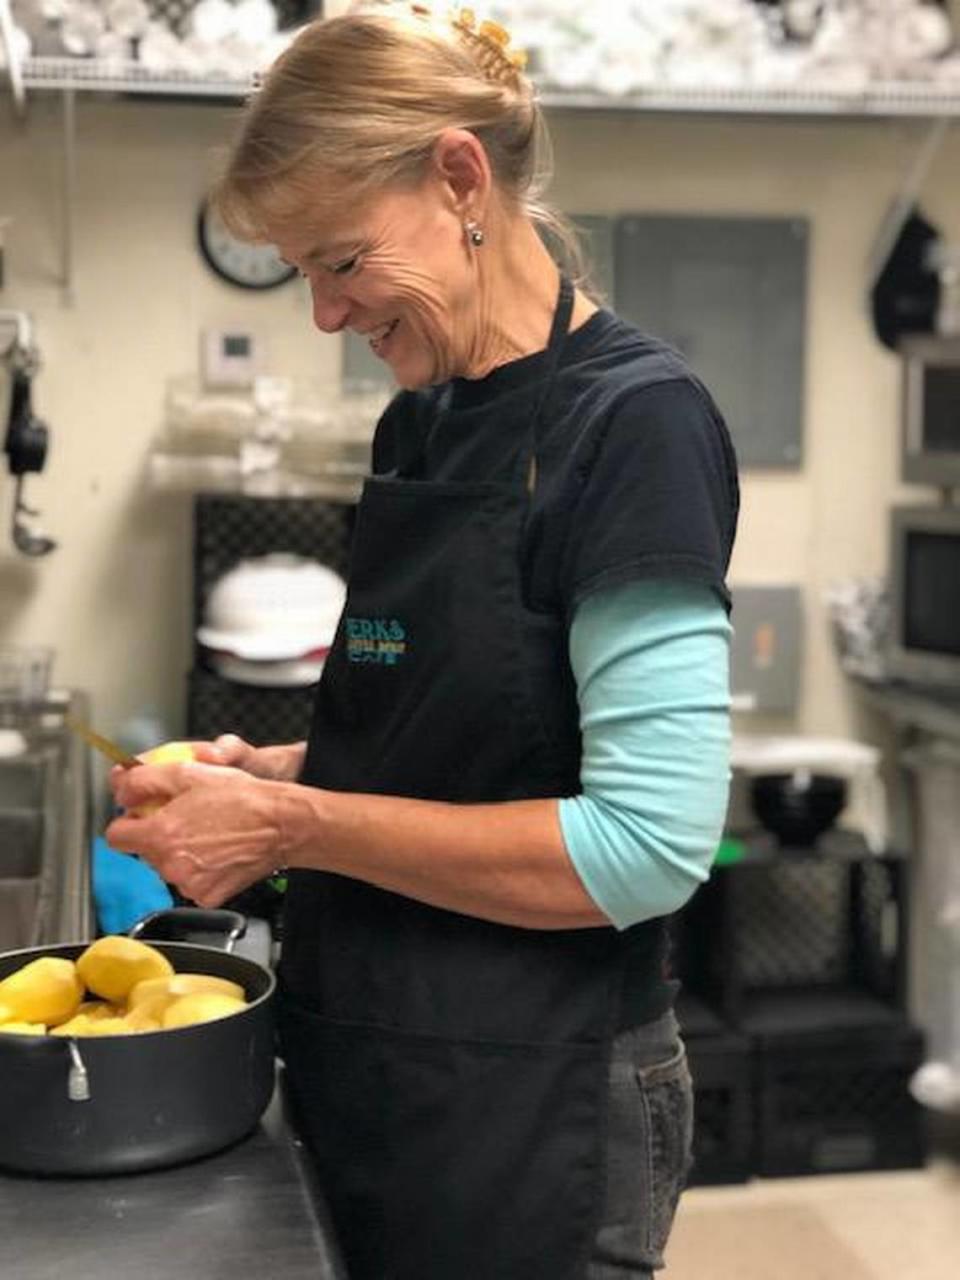 Perks co-owner Linda Lyon prepares potato salad from scratch. The popular side comes with any sandwich or wrap.